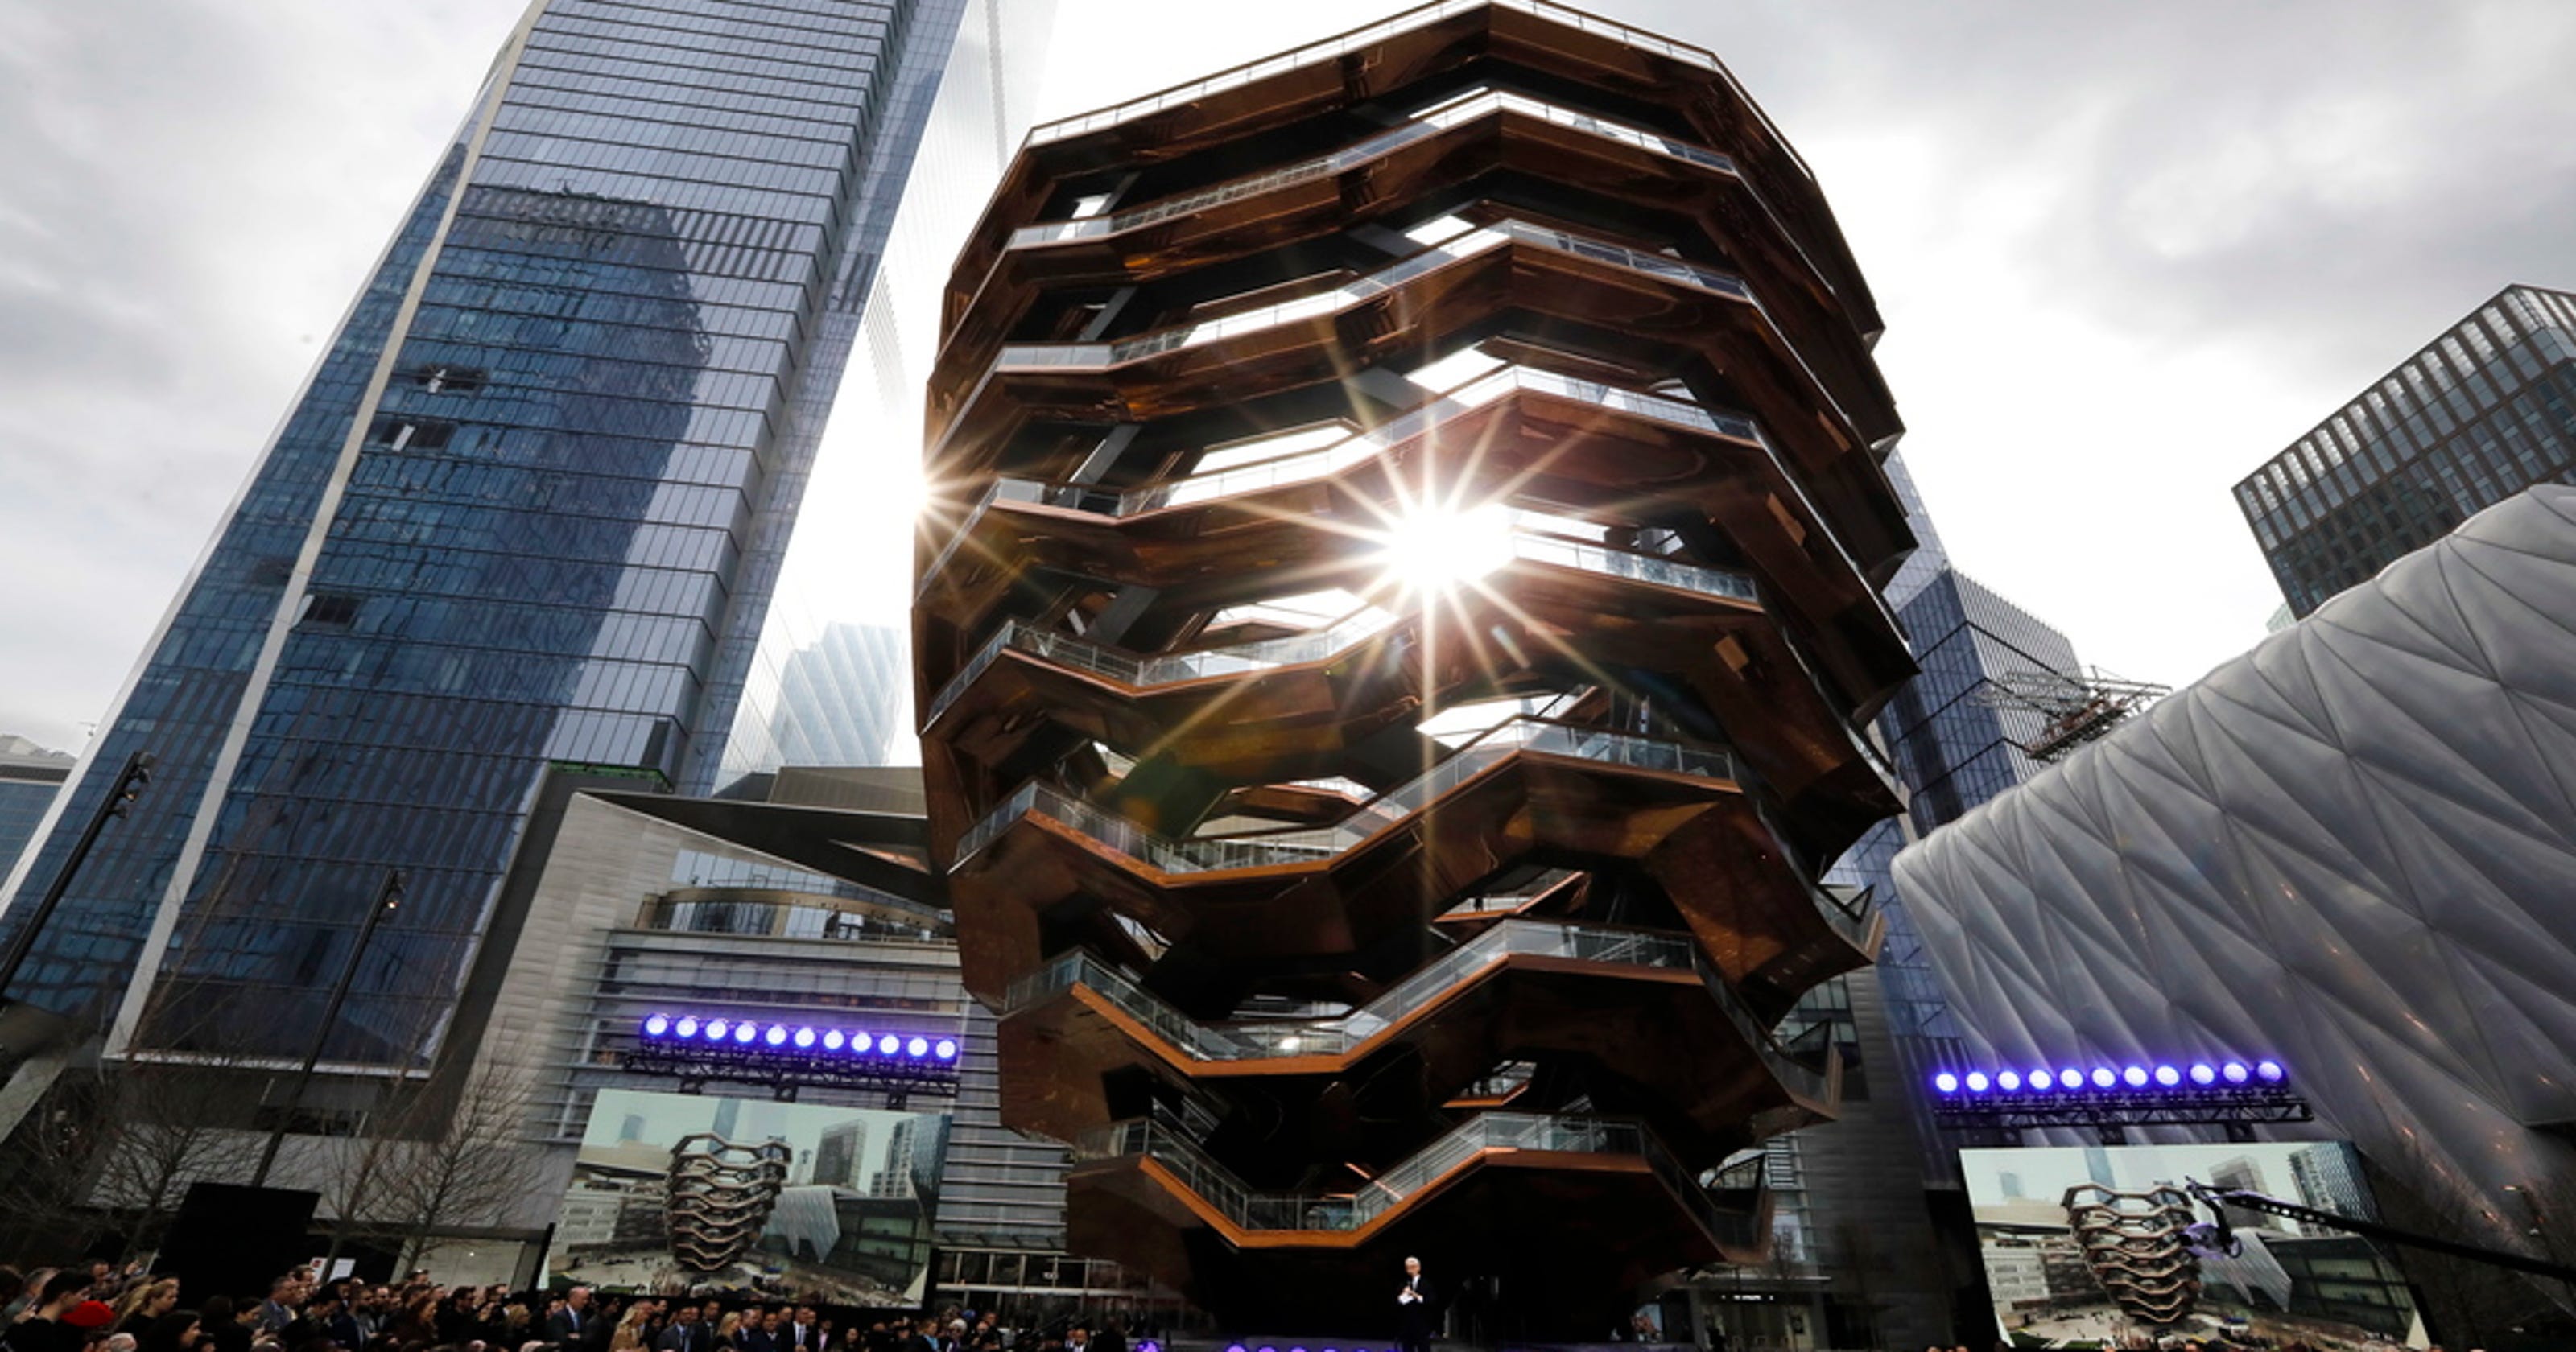 Eef9b27c 32fa 45fb B95d 980ebd613147 EPA USA NEW YORK HUDSON YARDS OPENS ?crop=1023,575,x0,y52&width=3200&height=1680&fit=bounds